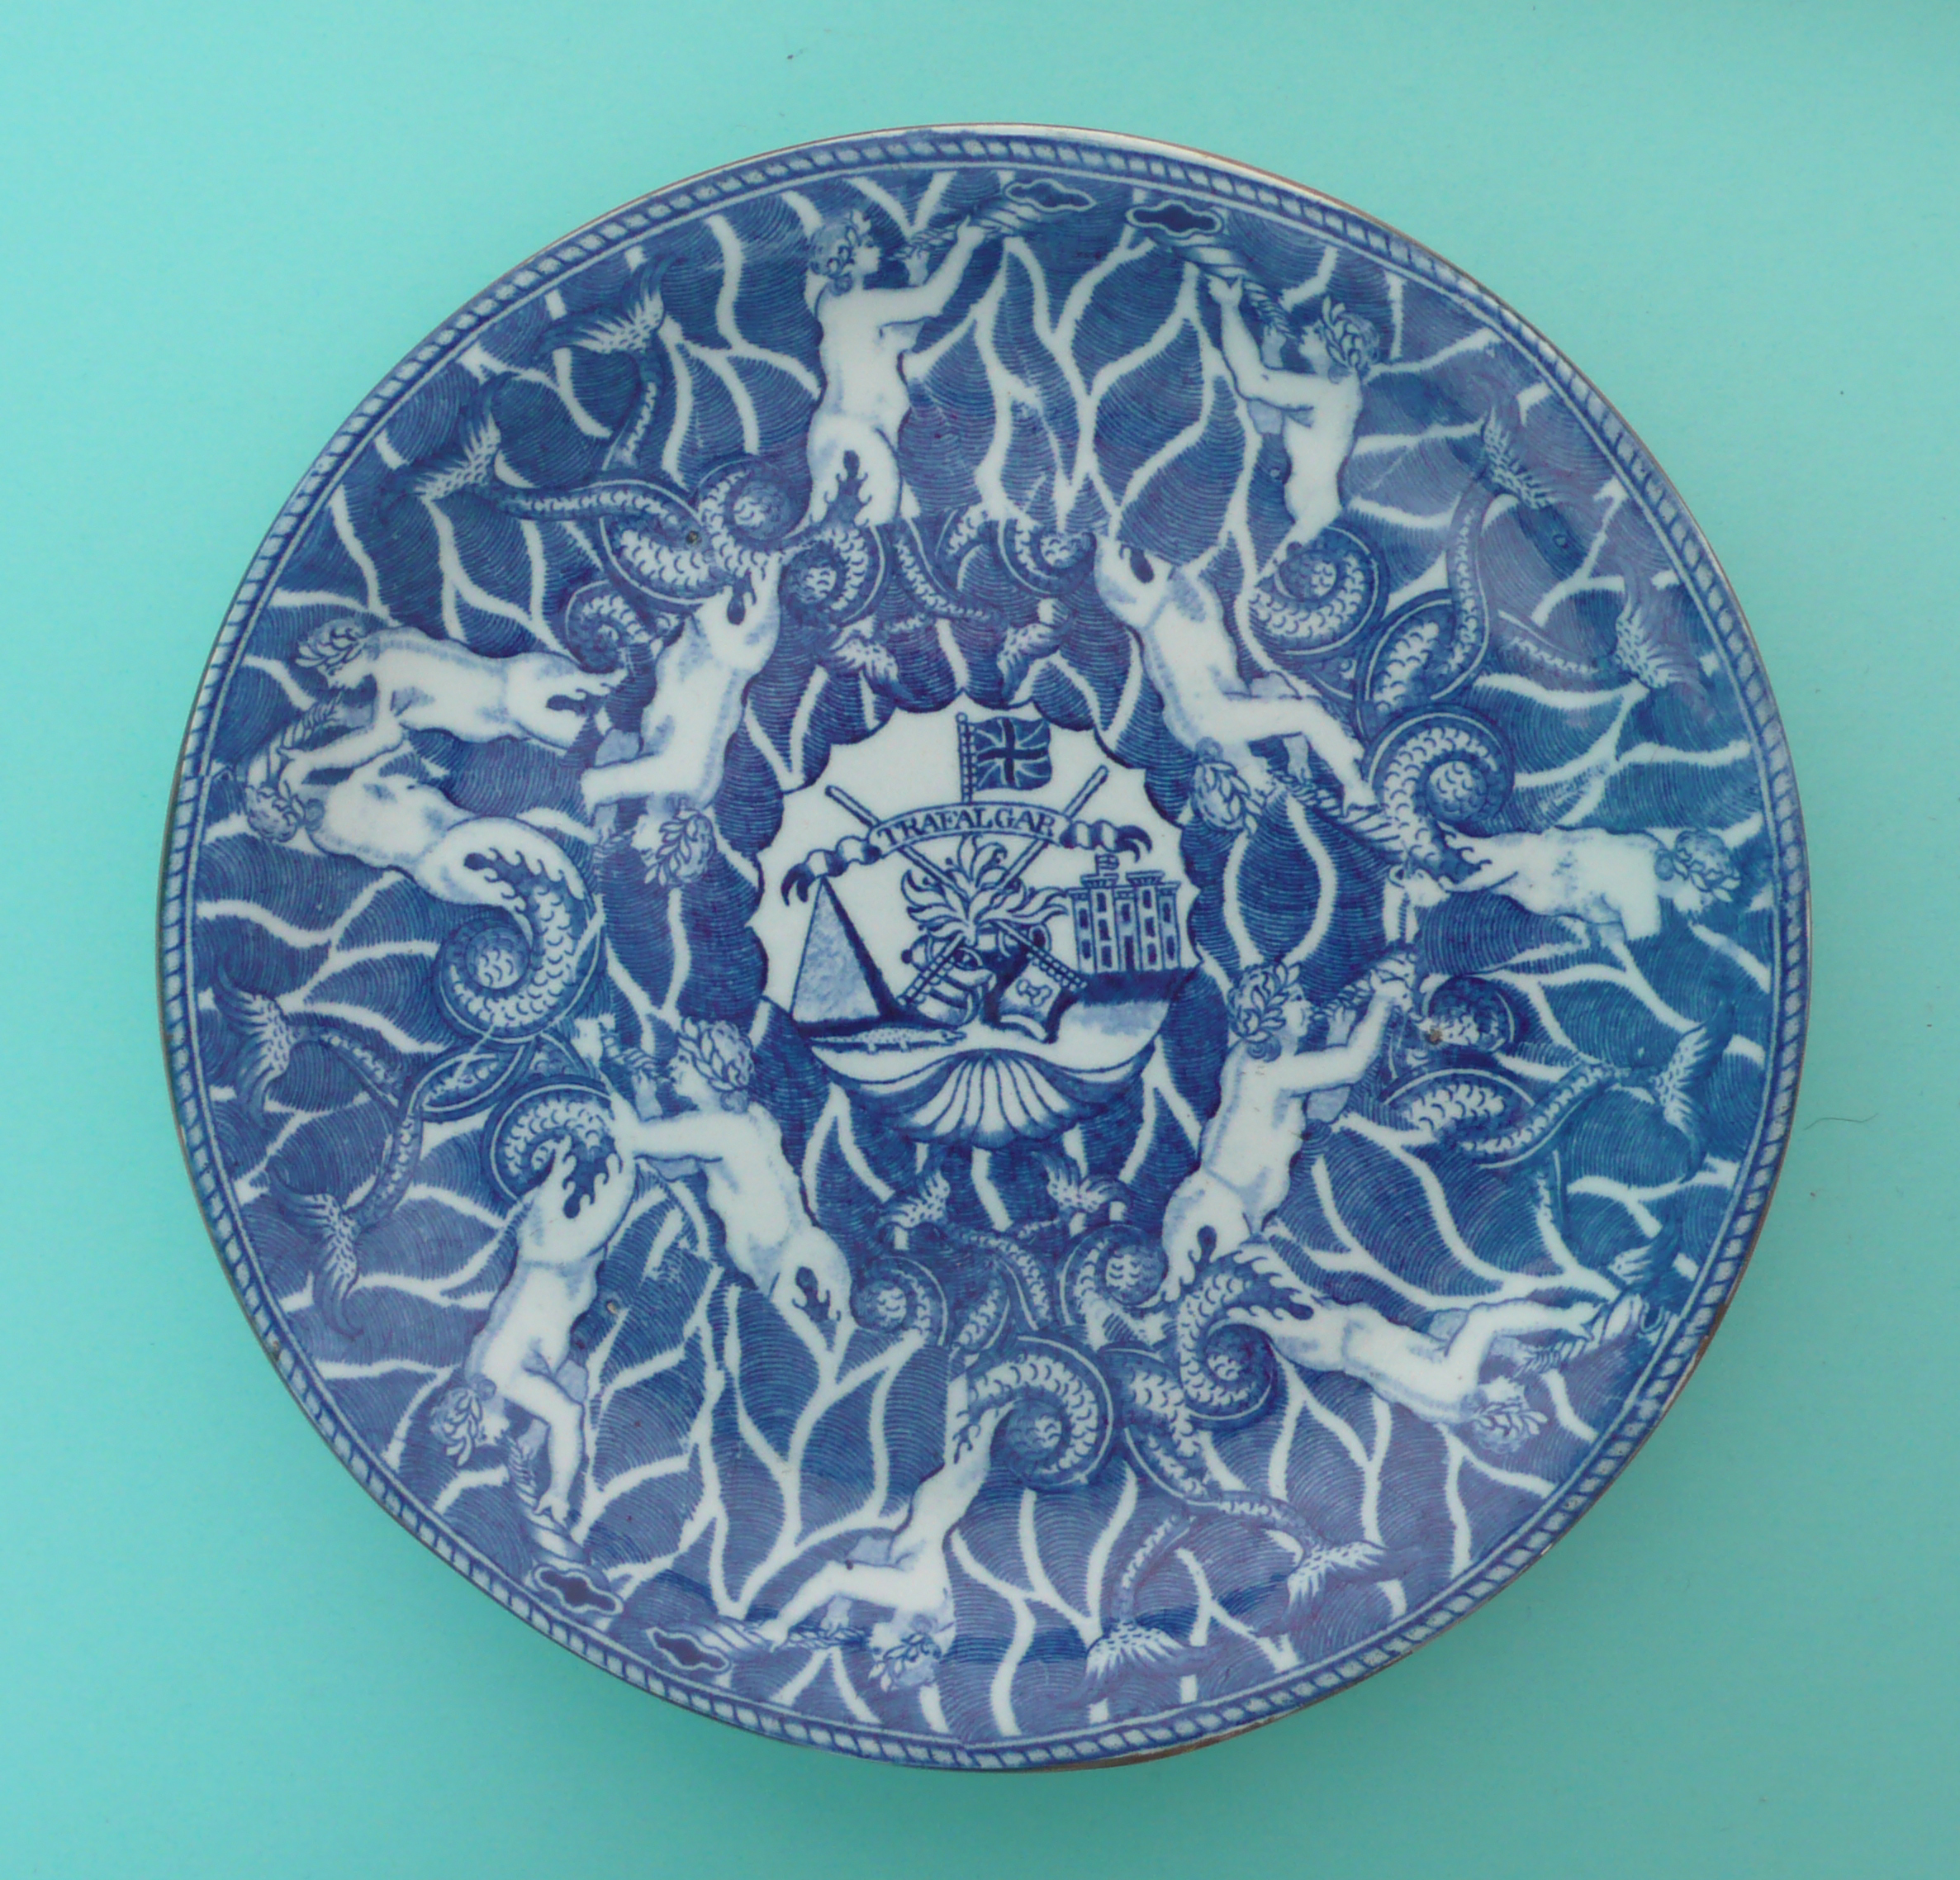 1805 Nelson and Trafalgar: a good pearlware saucer dush printed with an all over design of sea